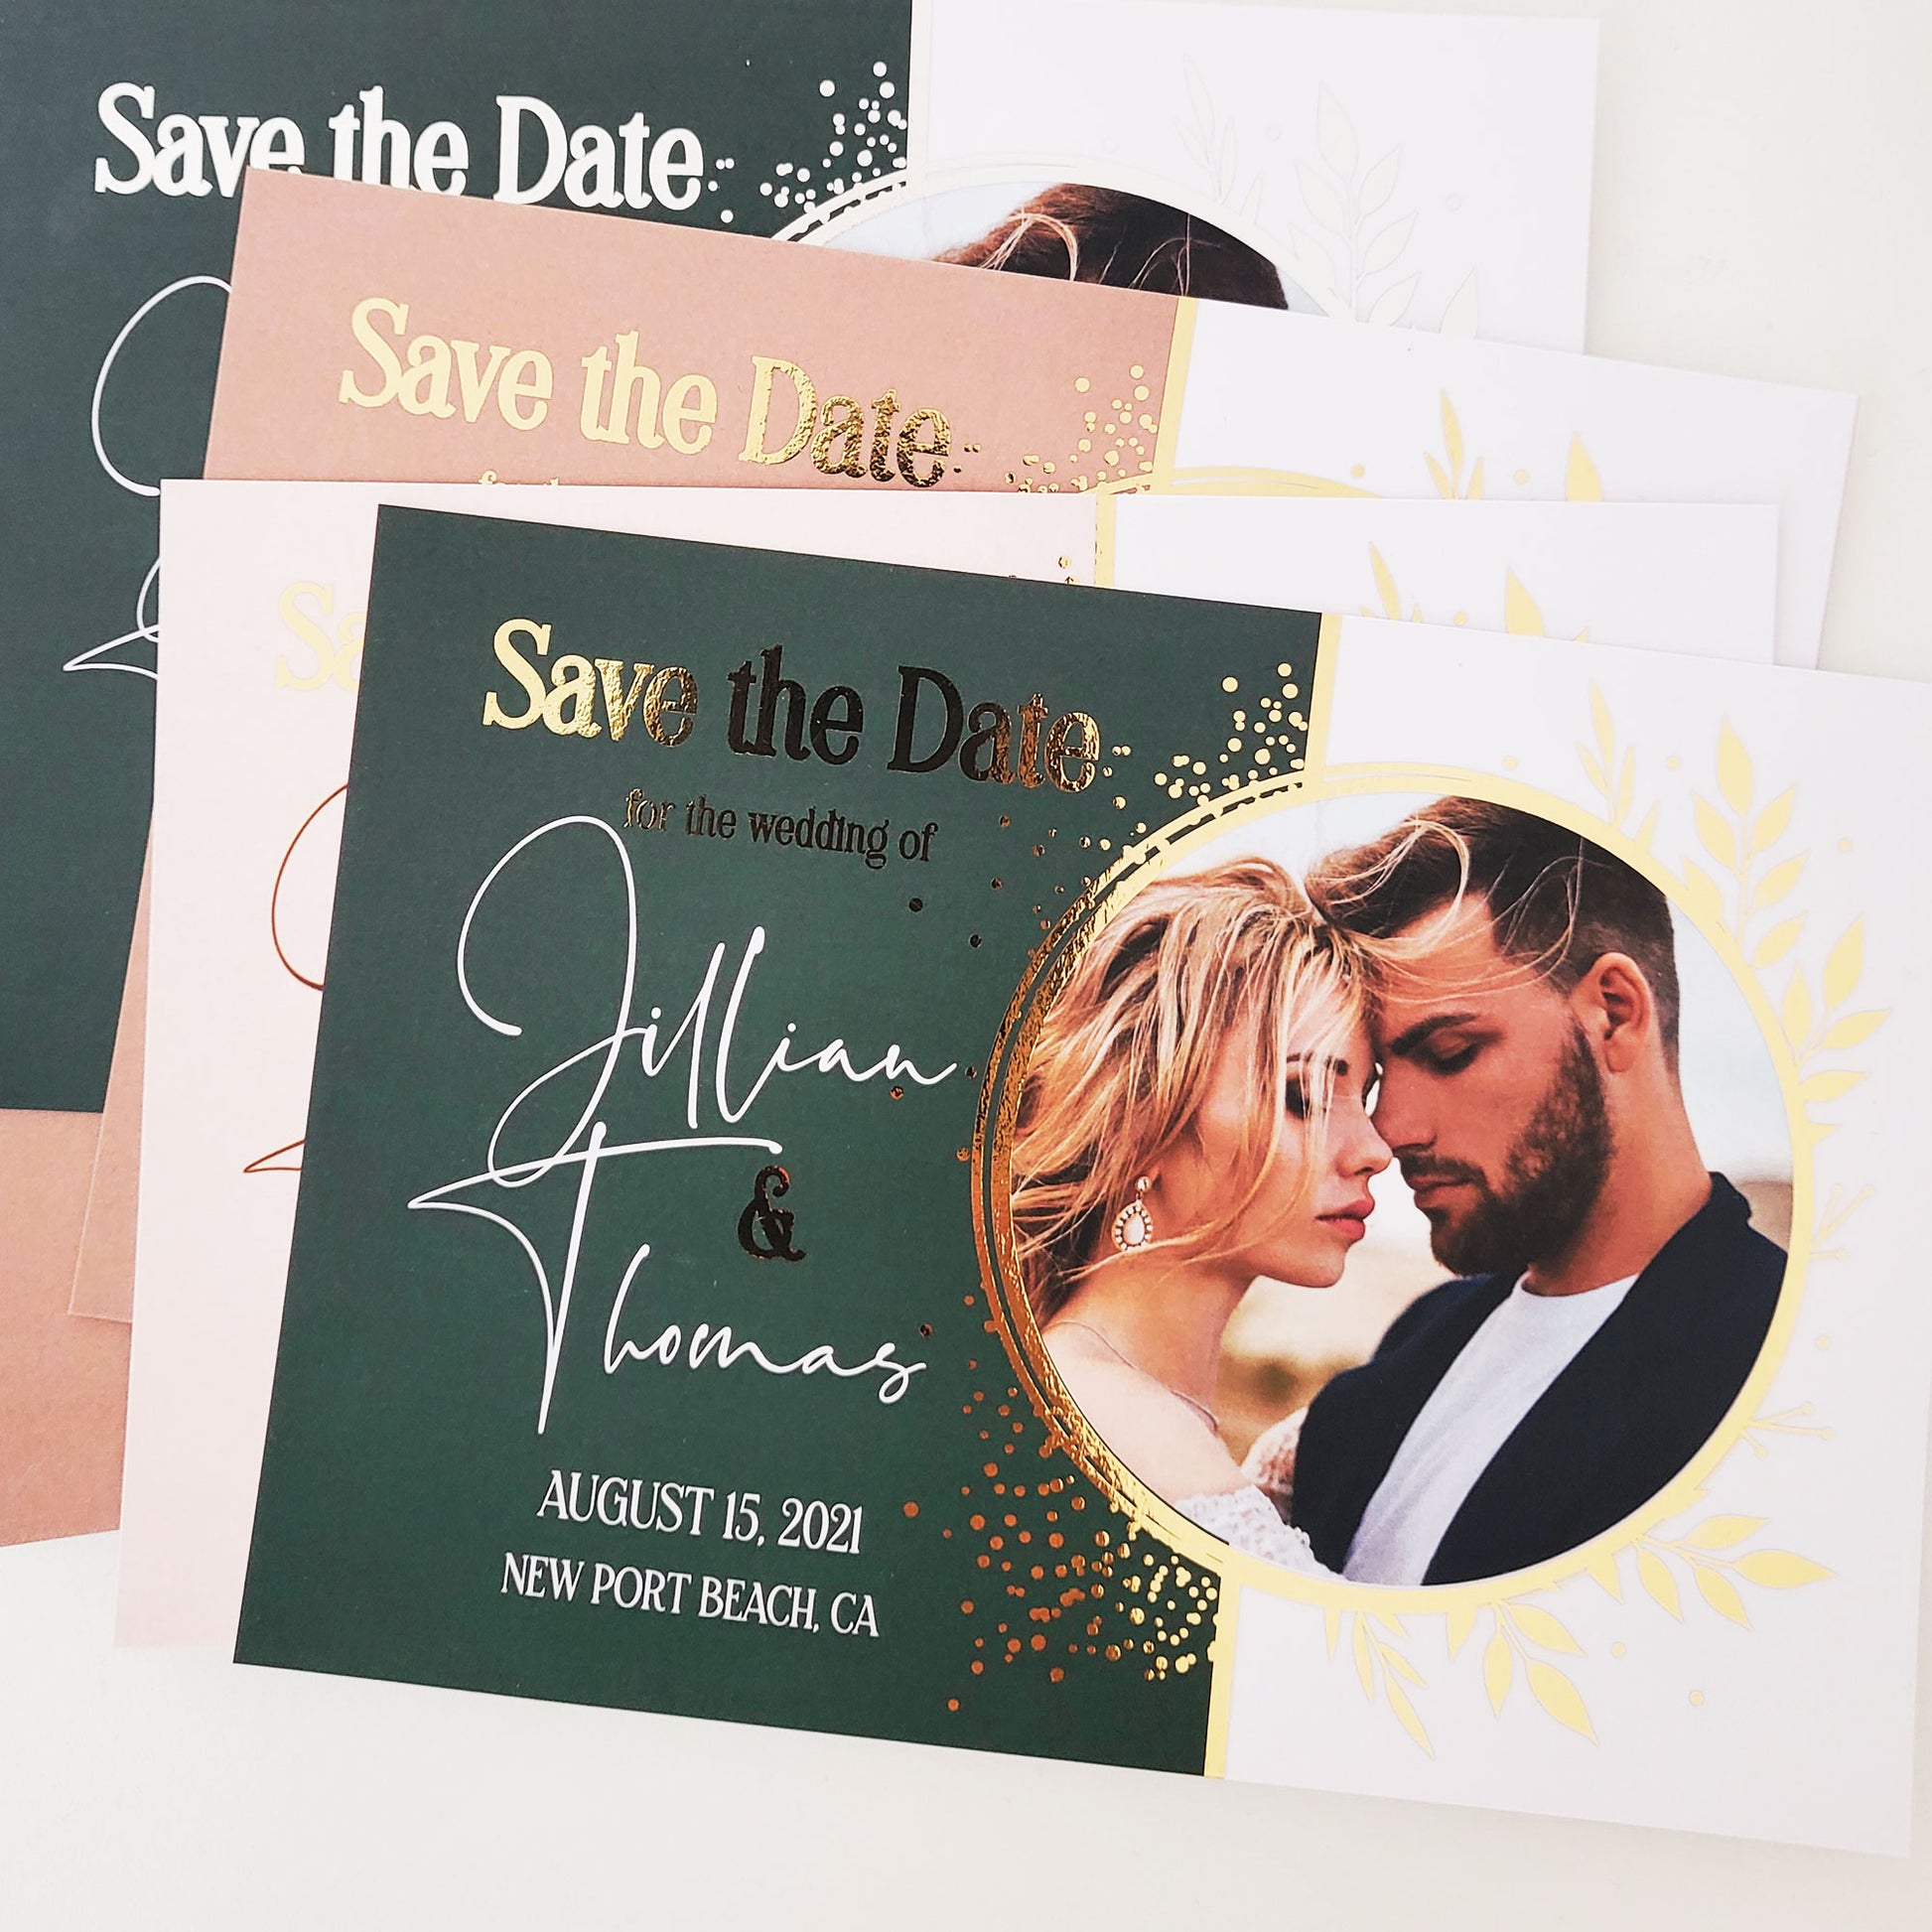 Personalized elegant save the date card with custom photo and gold foiled lettering - XOXOKristen